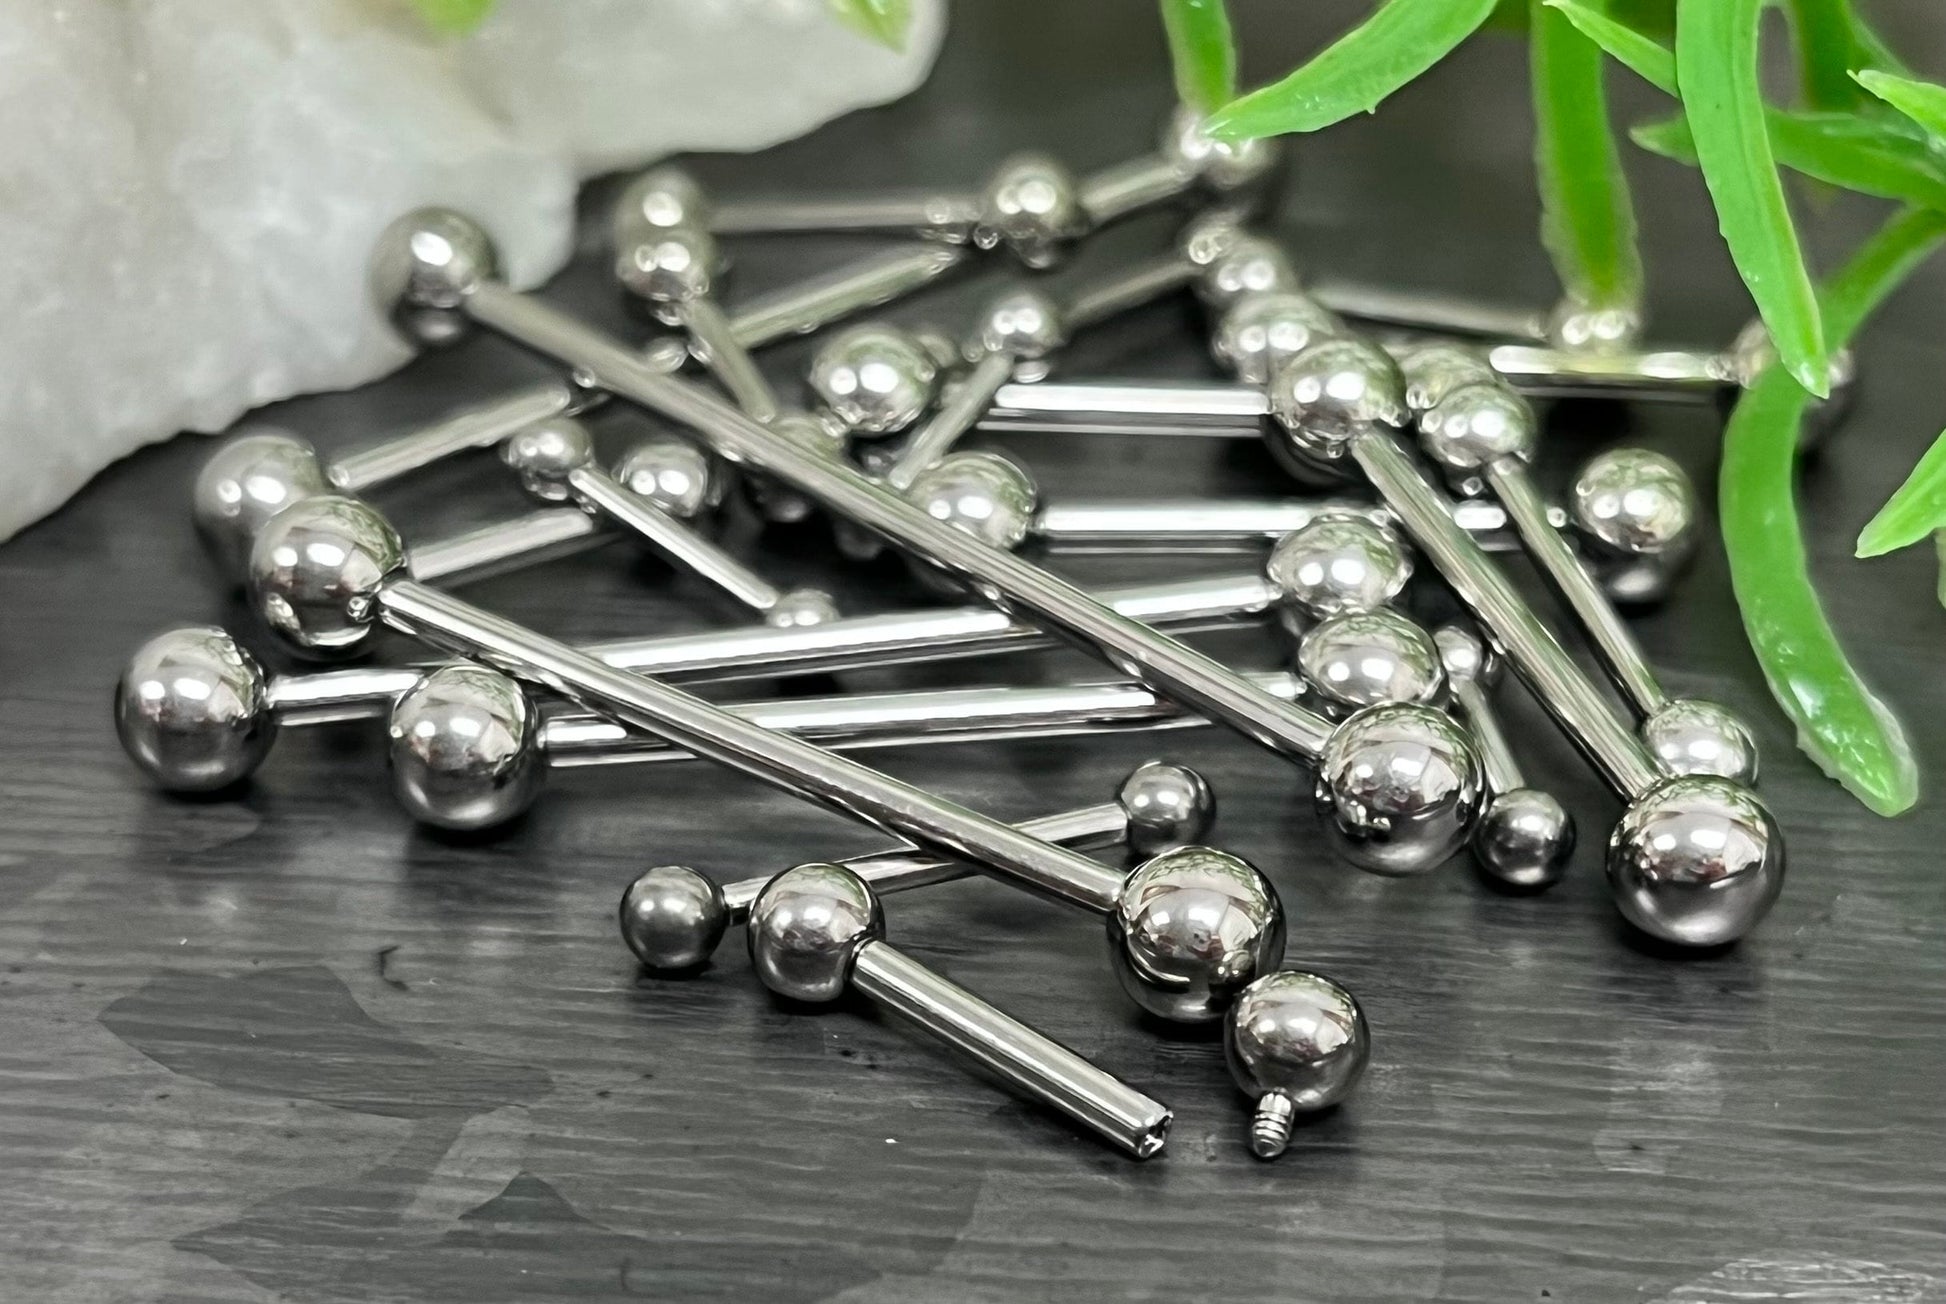 1 Piece Grade 23 Solid Titanium Internally Threaded Industrial Barbell /Eyebrow Ring - 16g or 14g - Different Ball Size & Lengths Available!